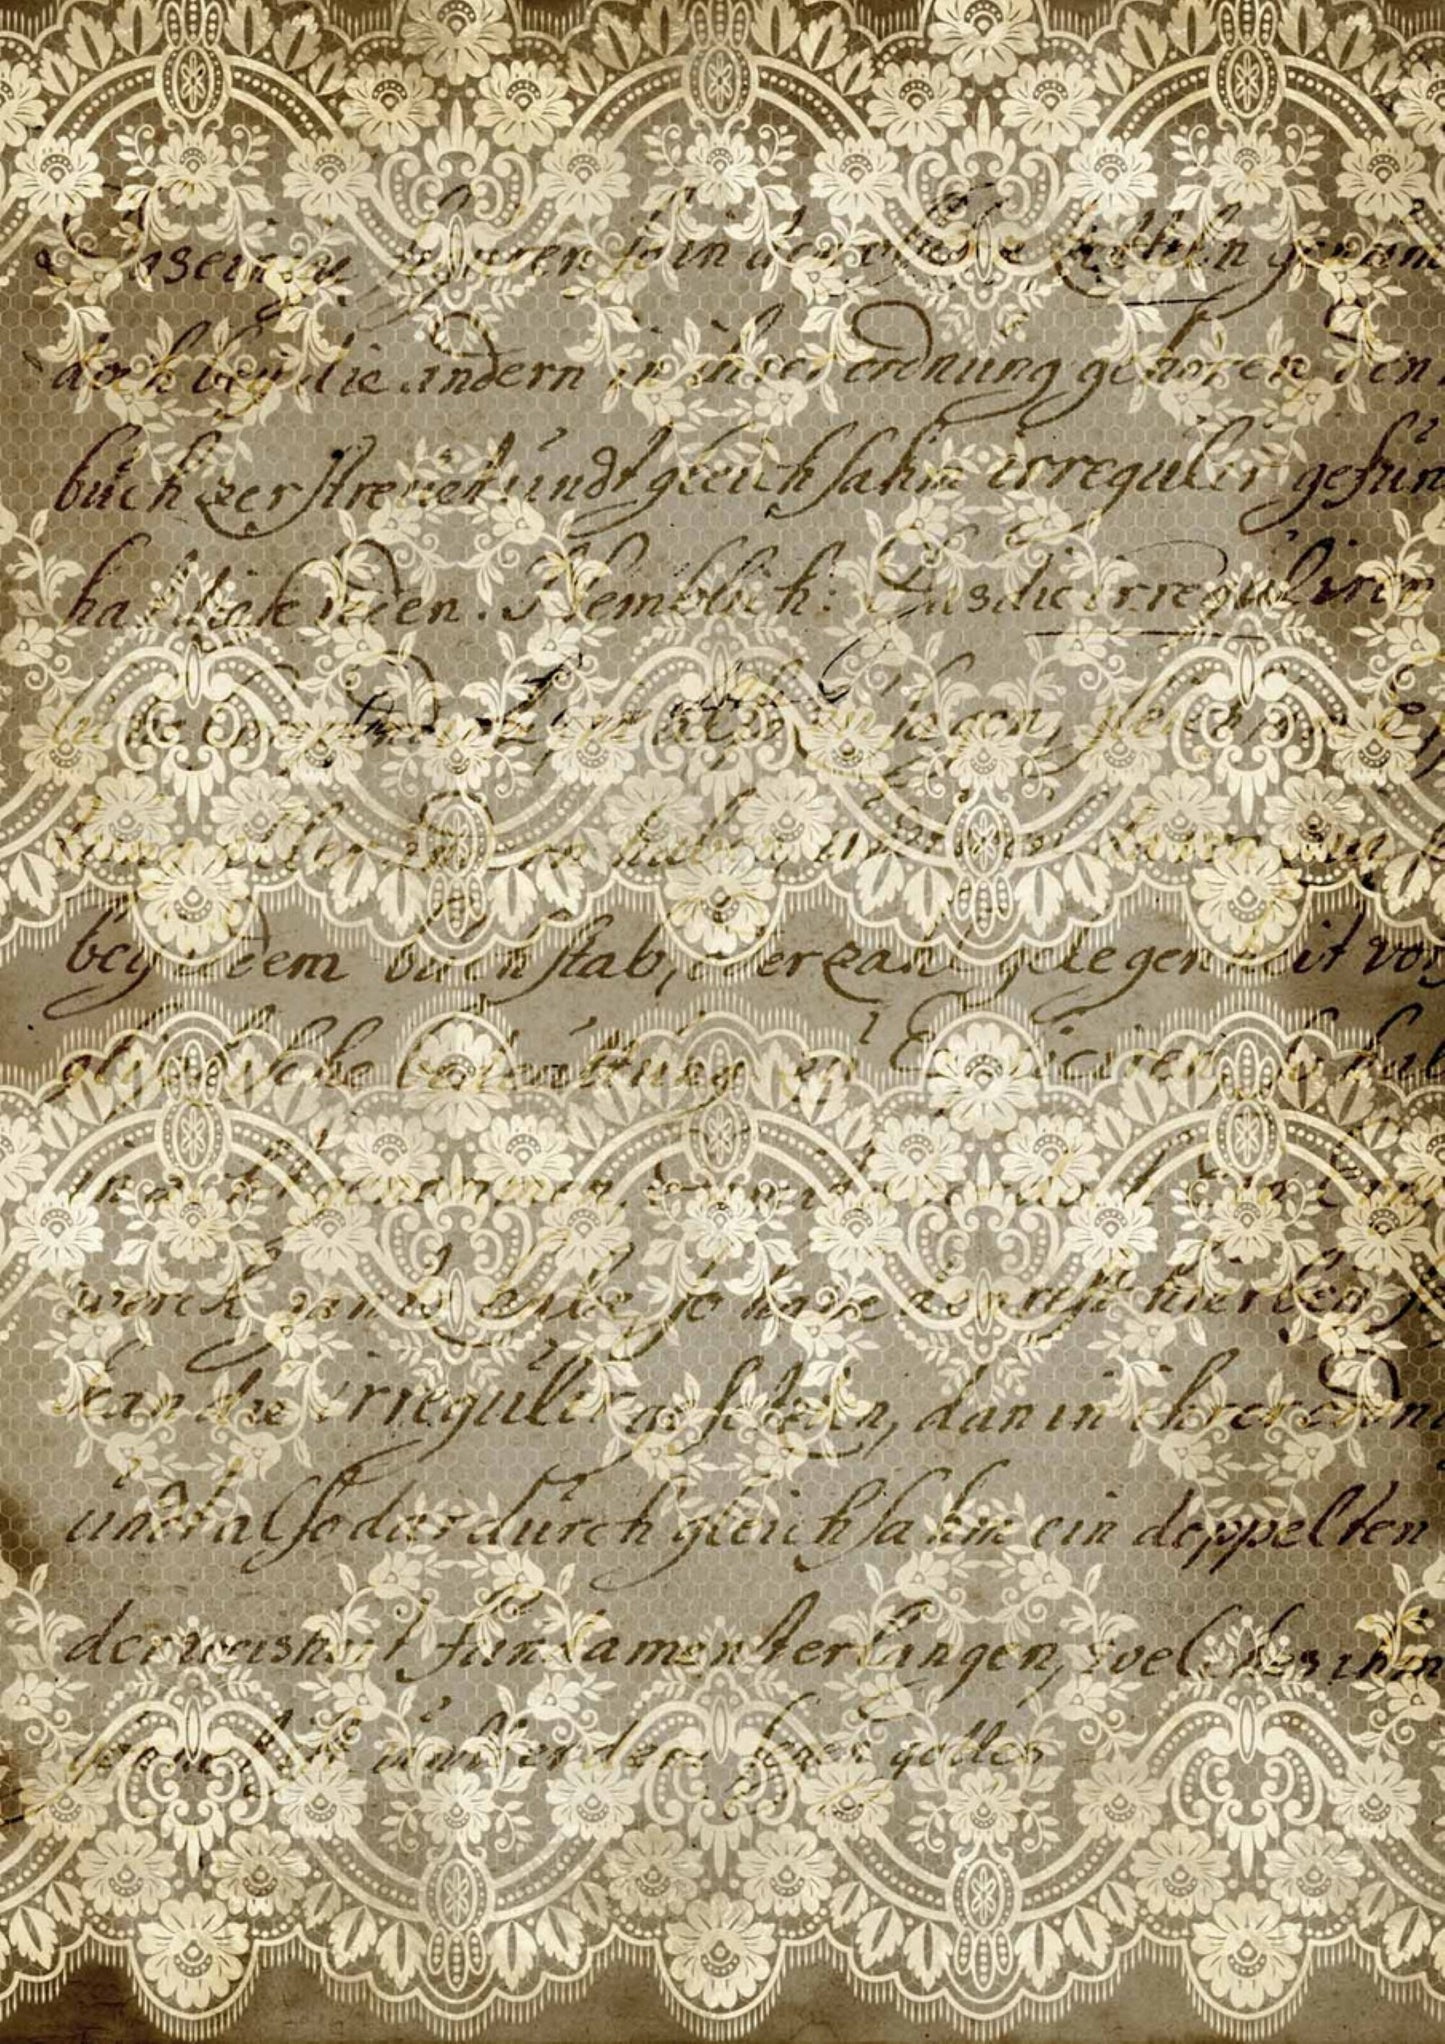 Decoupage Queen Stained Lace Rice Paper, DQRP 0149 A4 Size: A4 - 8.3" X 11.7" Rice Paper for decoupage, background, wallpaper